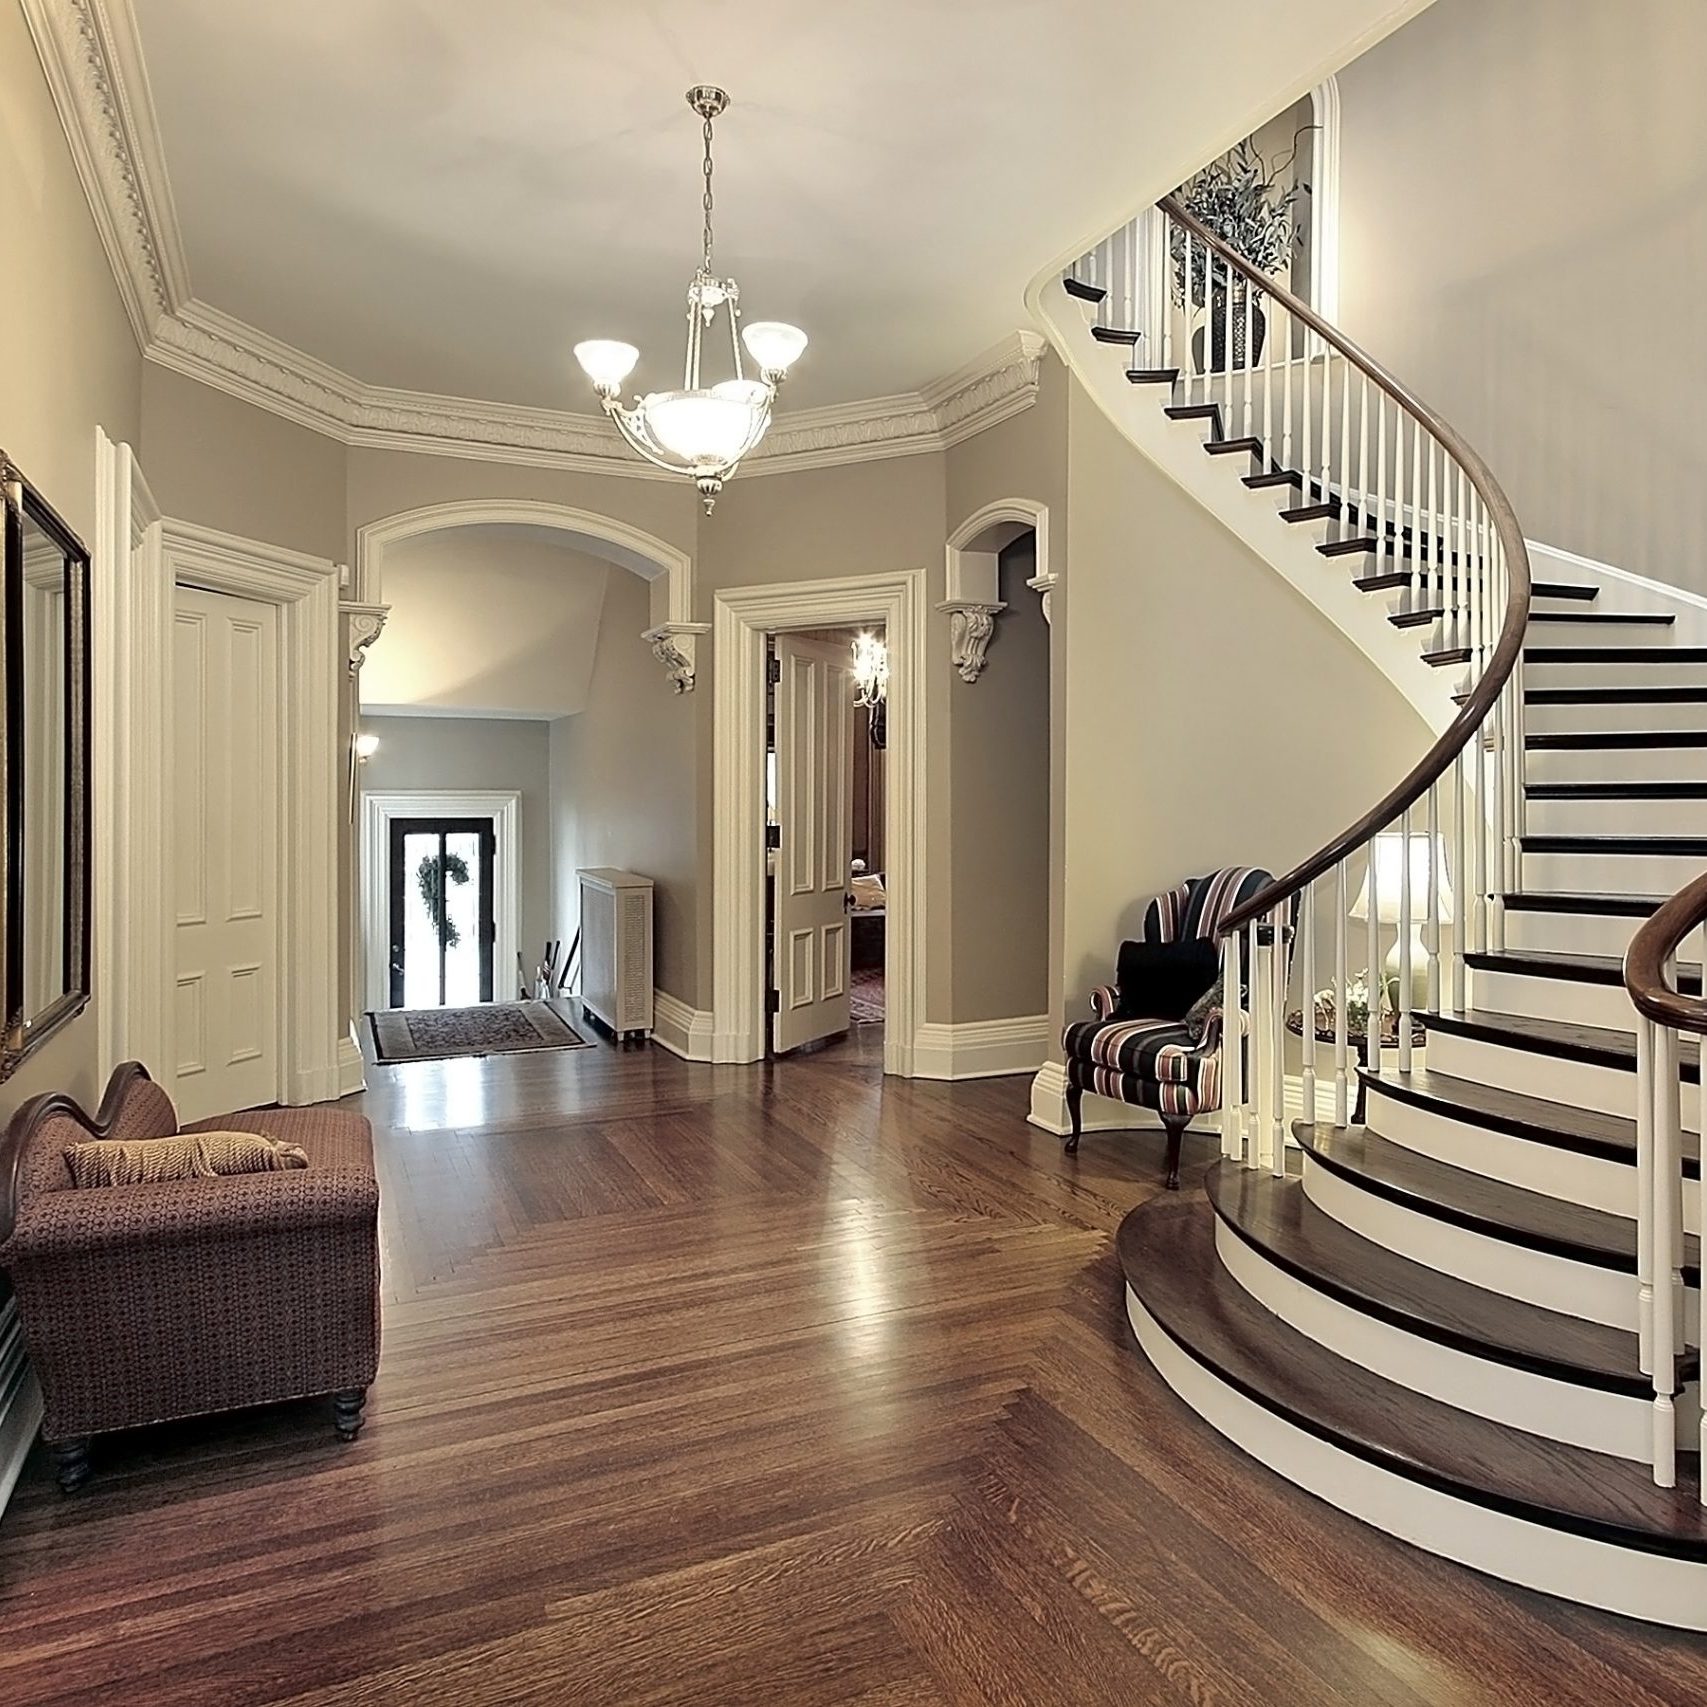 Foyer in traditional suburban home with curved staircase